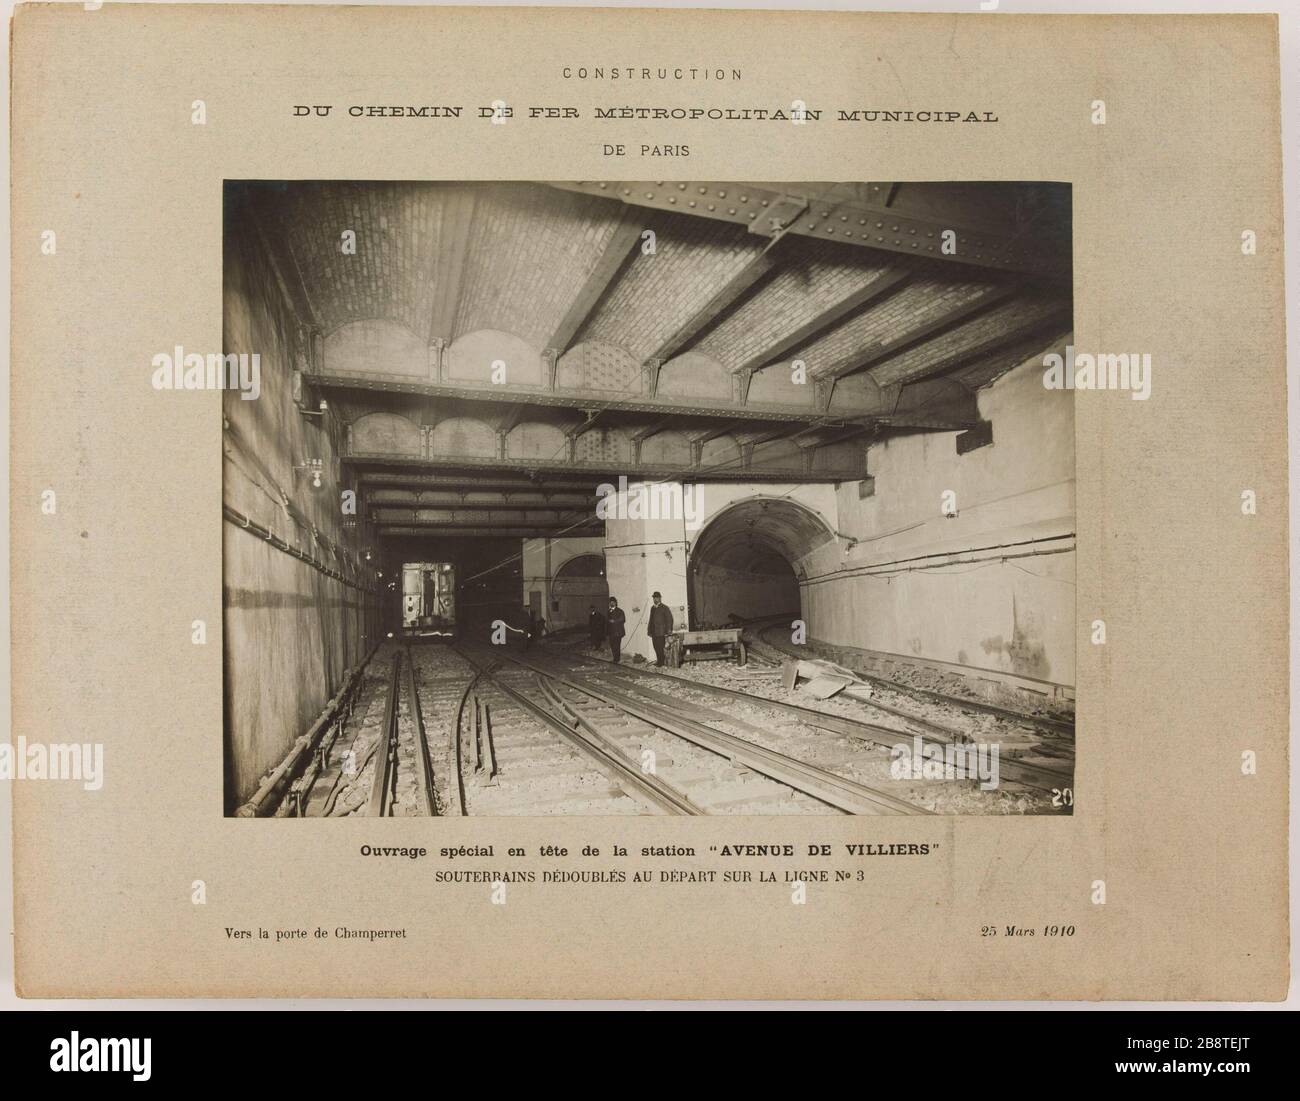 Construction / the railway metropolitan municipal / from Paris / Special  Book in head station "Avenue de Villiers" / Underground split from the line  3 / To the door of Champerret /